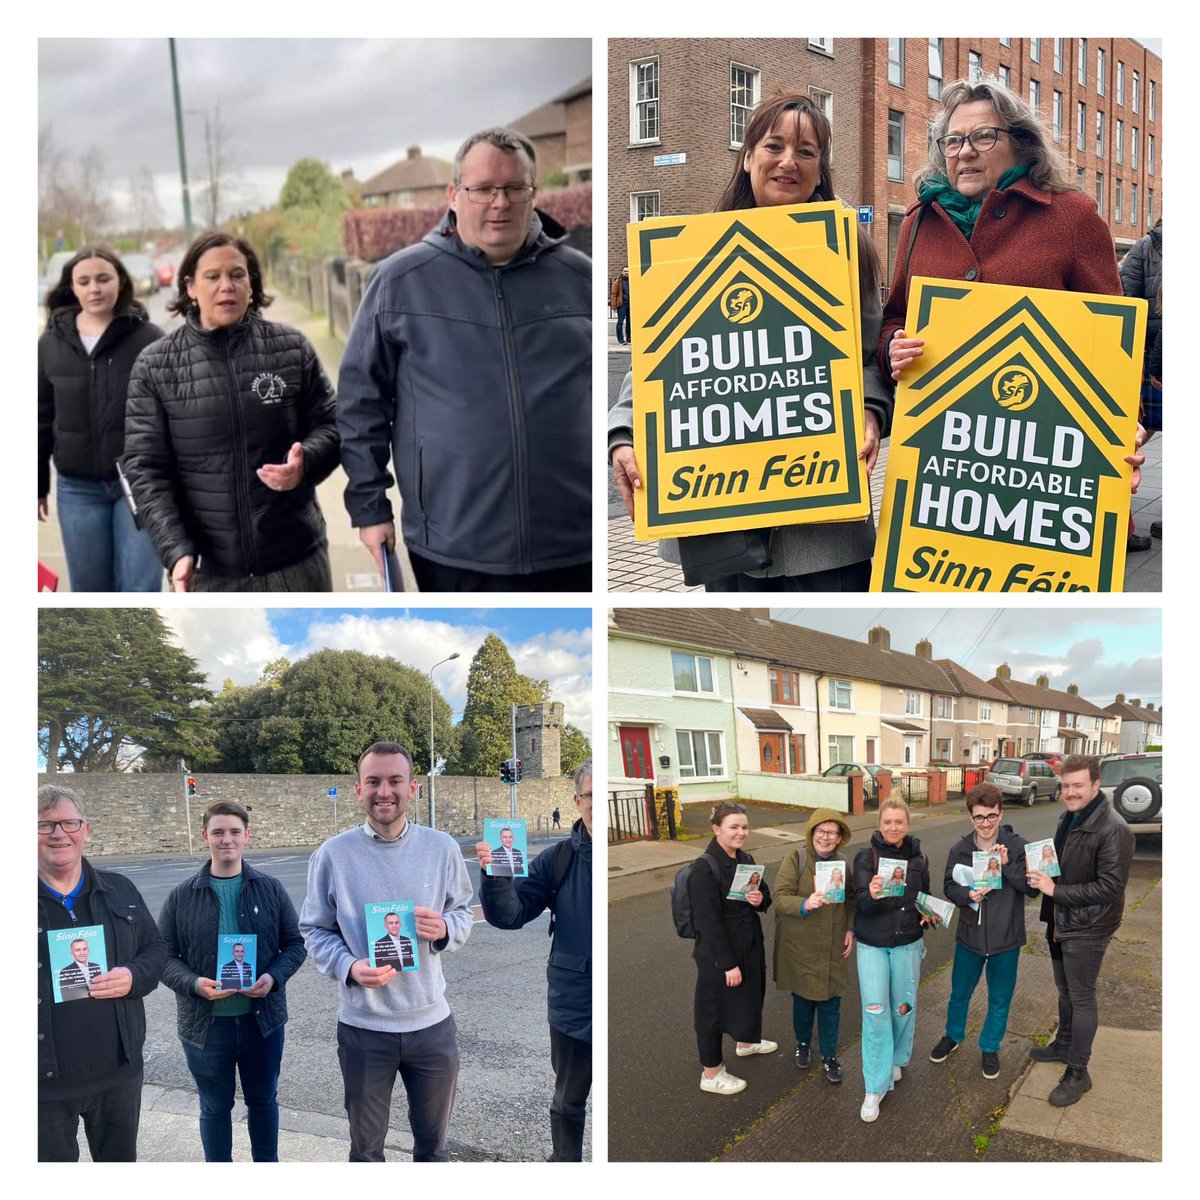 50 days left until #LE24 & #EU24
Our Sinn Féin candidates are out day and night speaking and engaging with residents and communities across all of Dublin Central. It's clear we need change and #ChangeStartsHere 
Vote Sinn Féin June 7th to elect a strong Sinn Féin team to DCC & EP